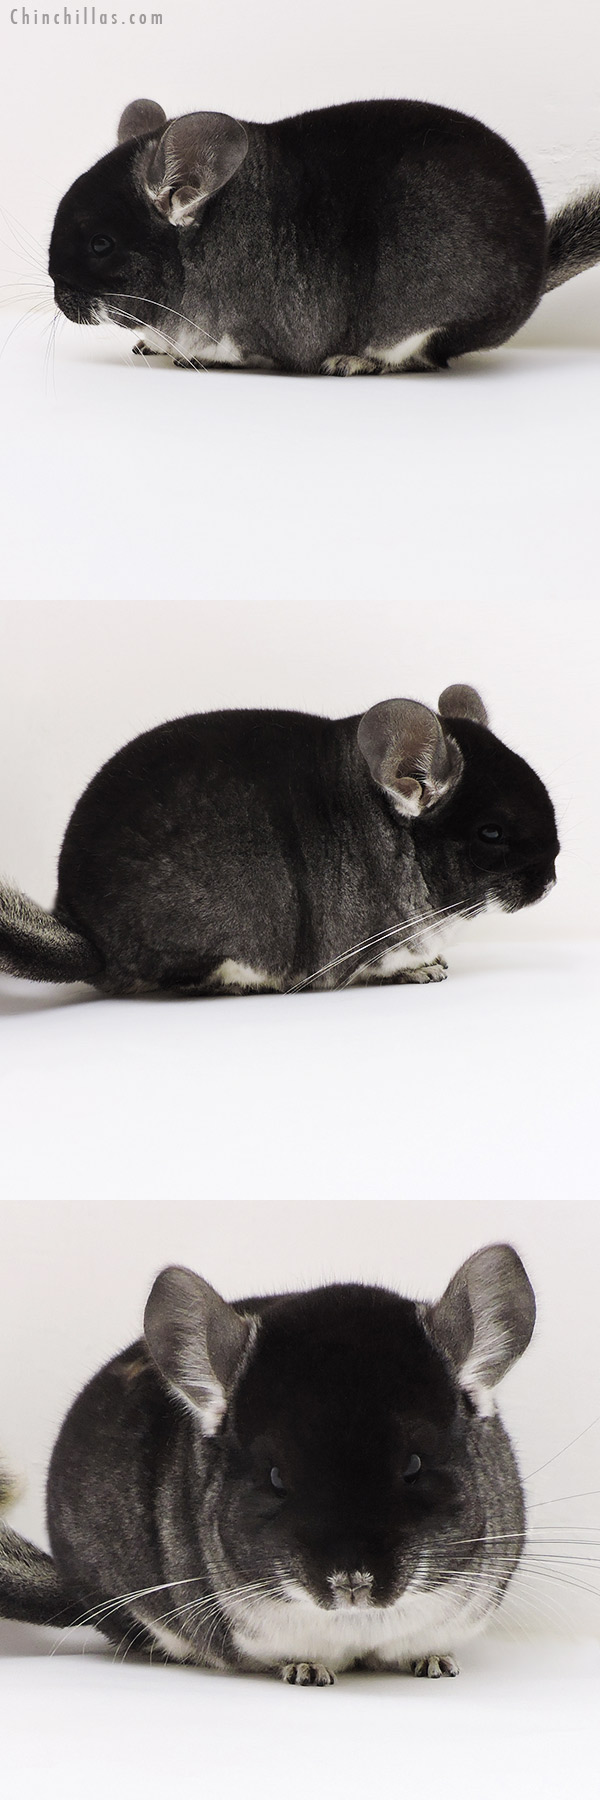 Chinchilla or related item offered for sale or export on Chinchillas.com - 17163 Blocky Brevi Type Show Quality Black Velvet Female Chinchilla